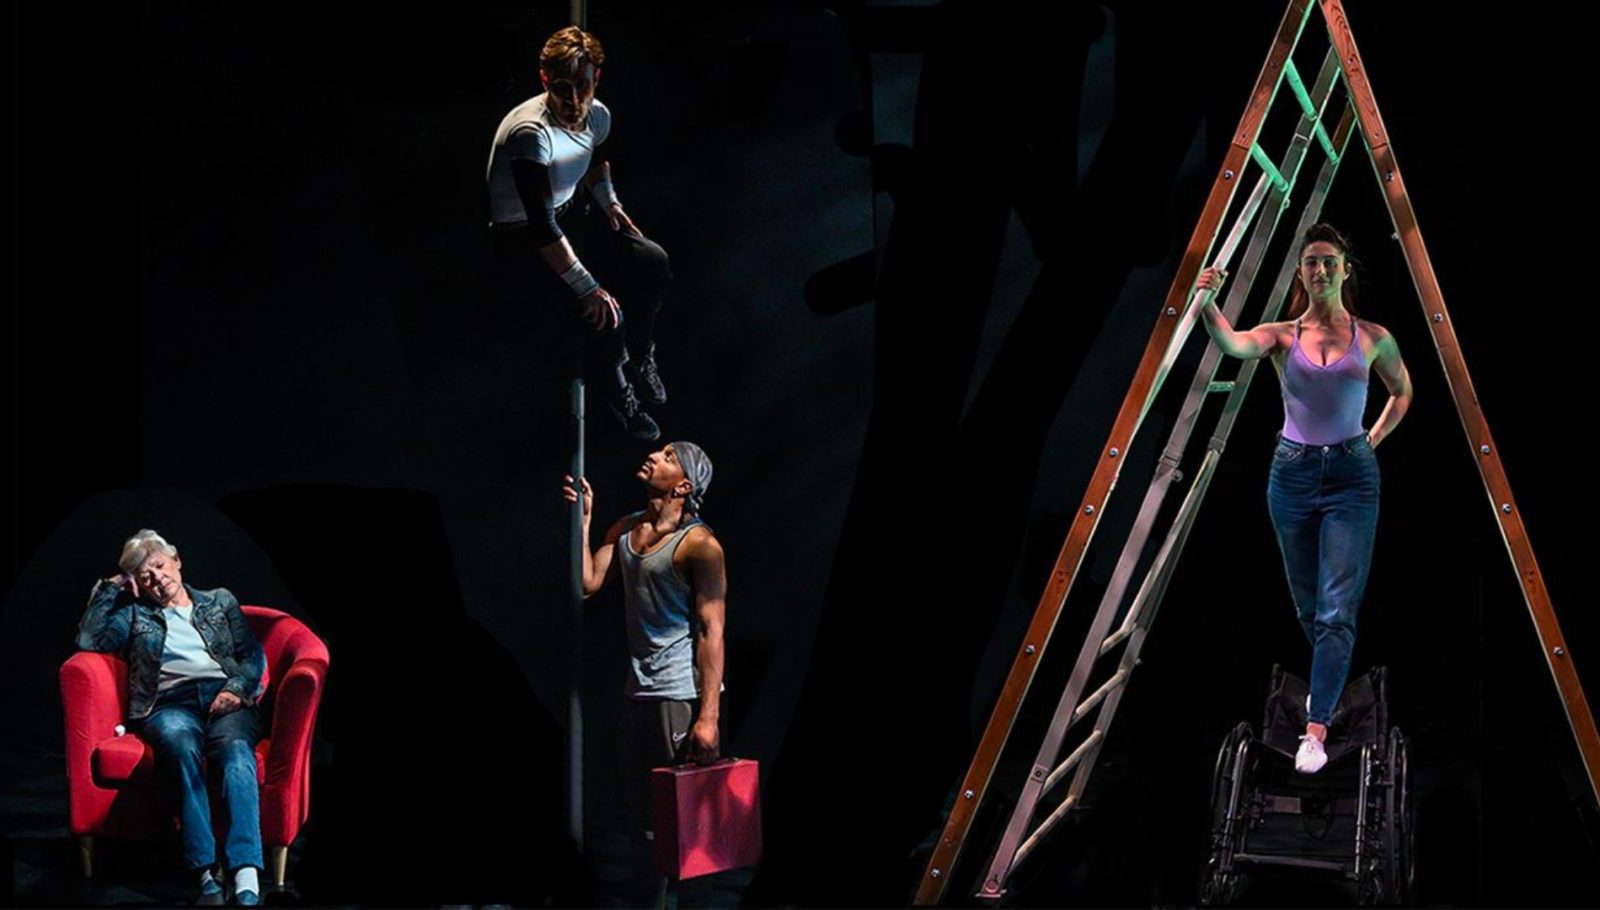 Disabled and non-disabled circus artists perform in "Delicate" by Extraordinary Bodies. These four performers make use of various acrobatic apparatuses